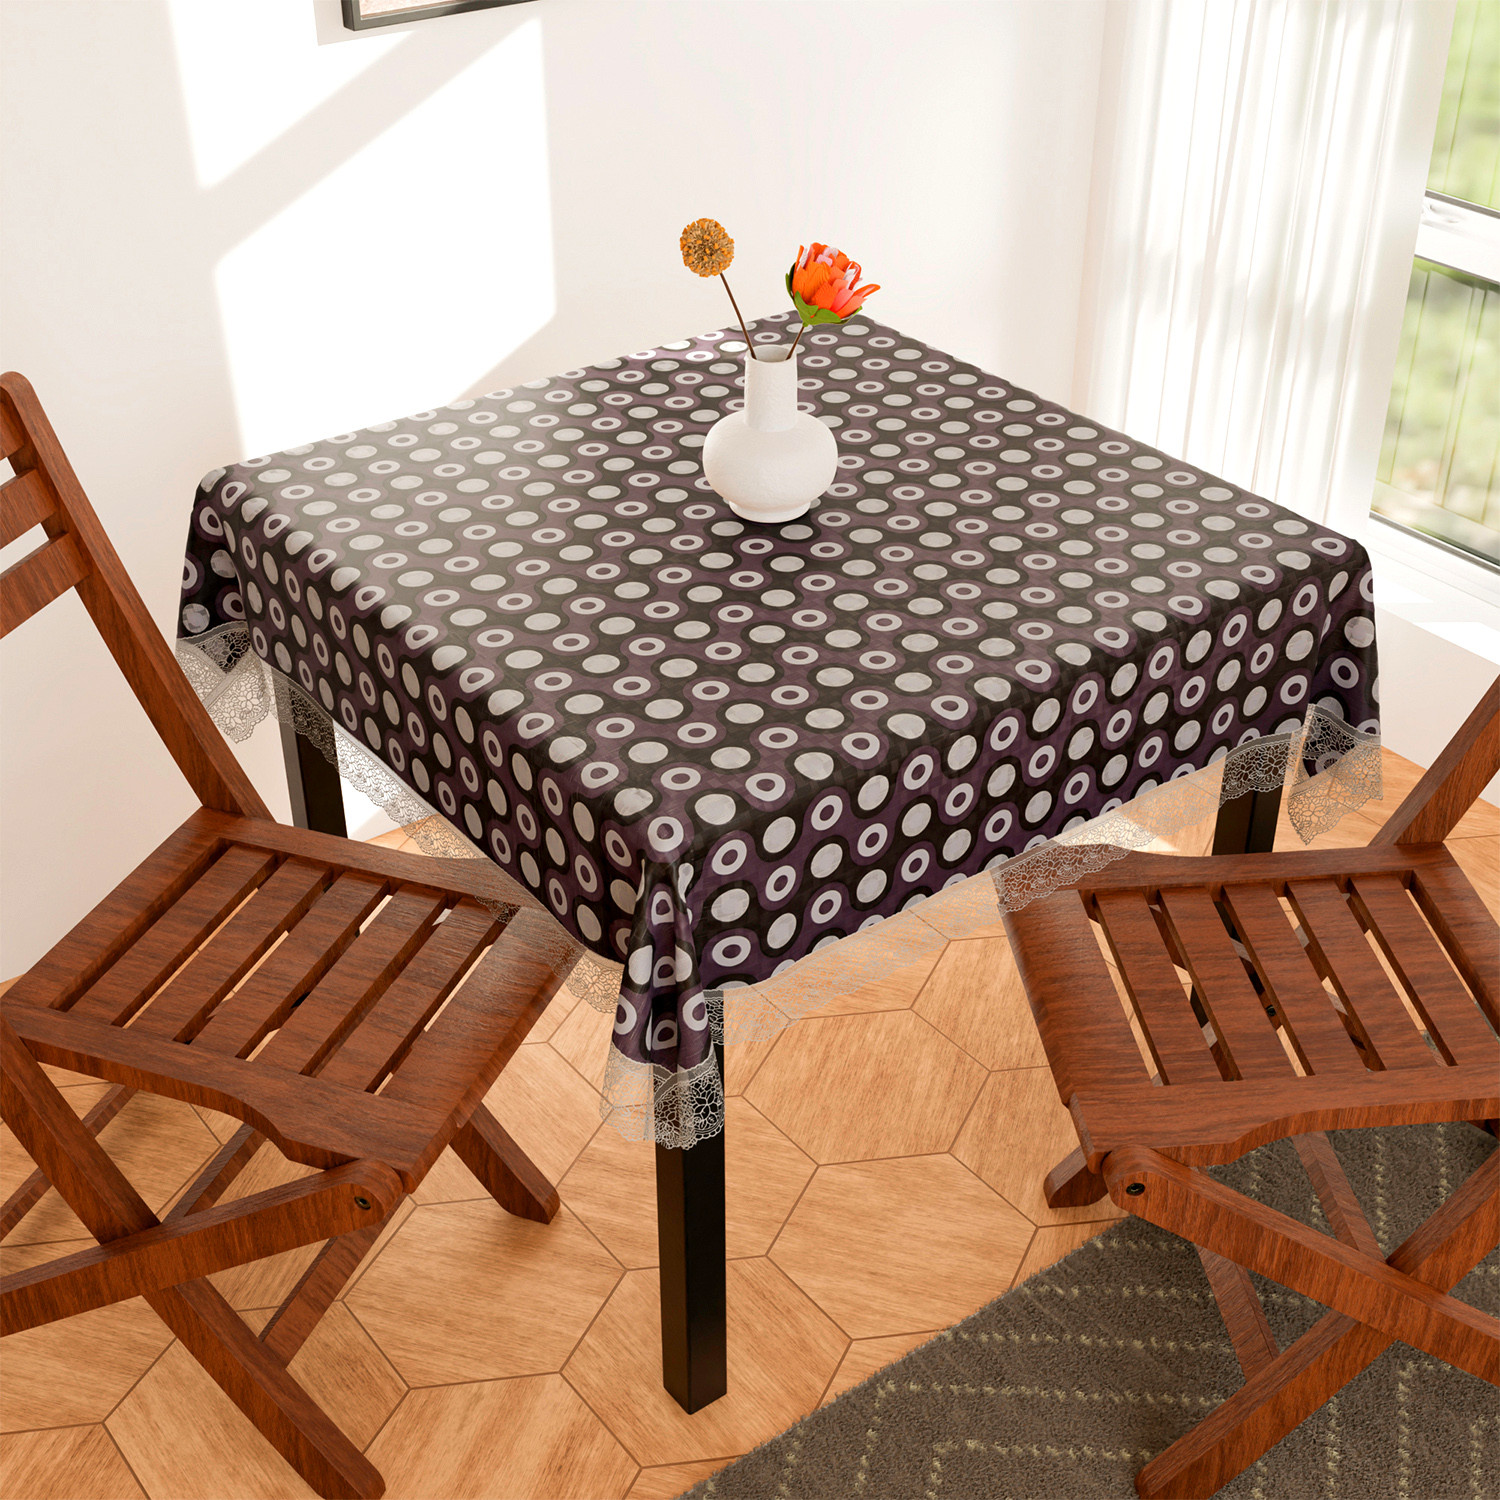 Kuber Industries Square Table Cover for 4 Seater|PVC Waterproof Circle Pattern Tablecloth Indoor & Outdoor|48x48 Inch (Purple)